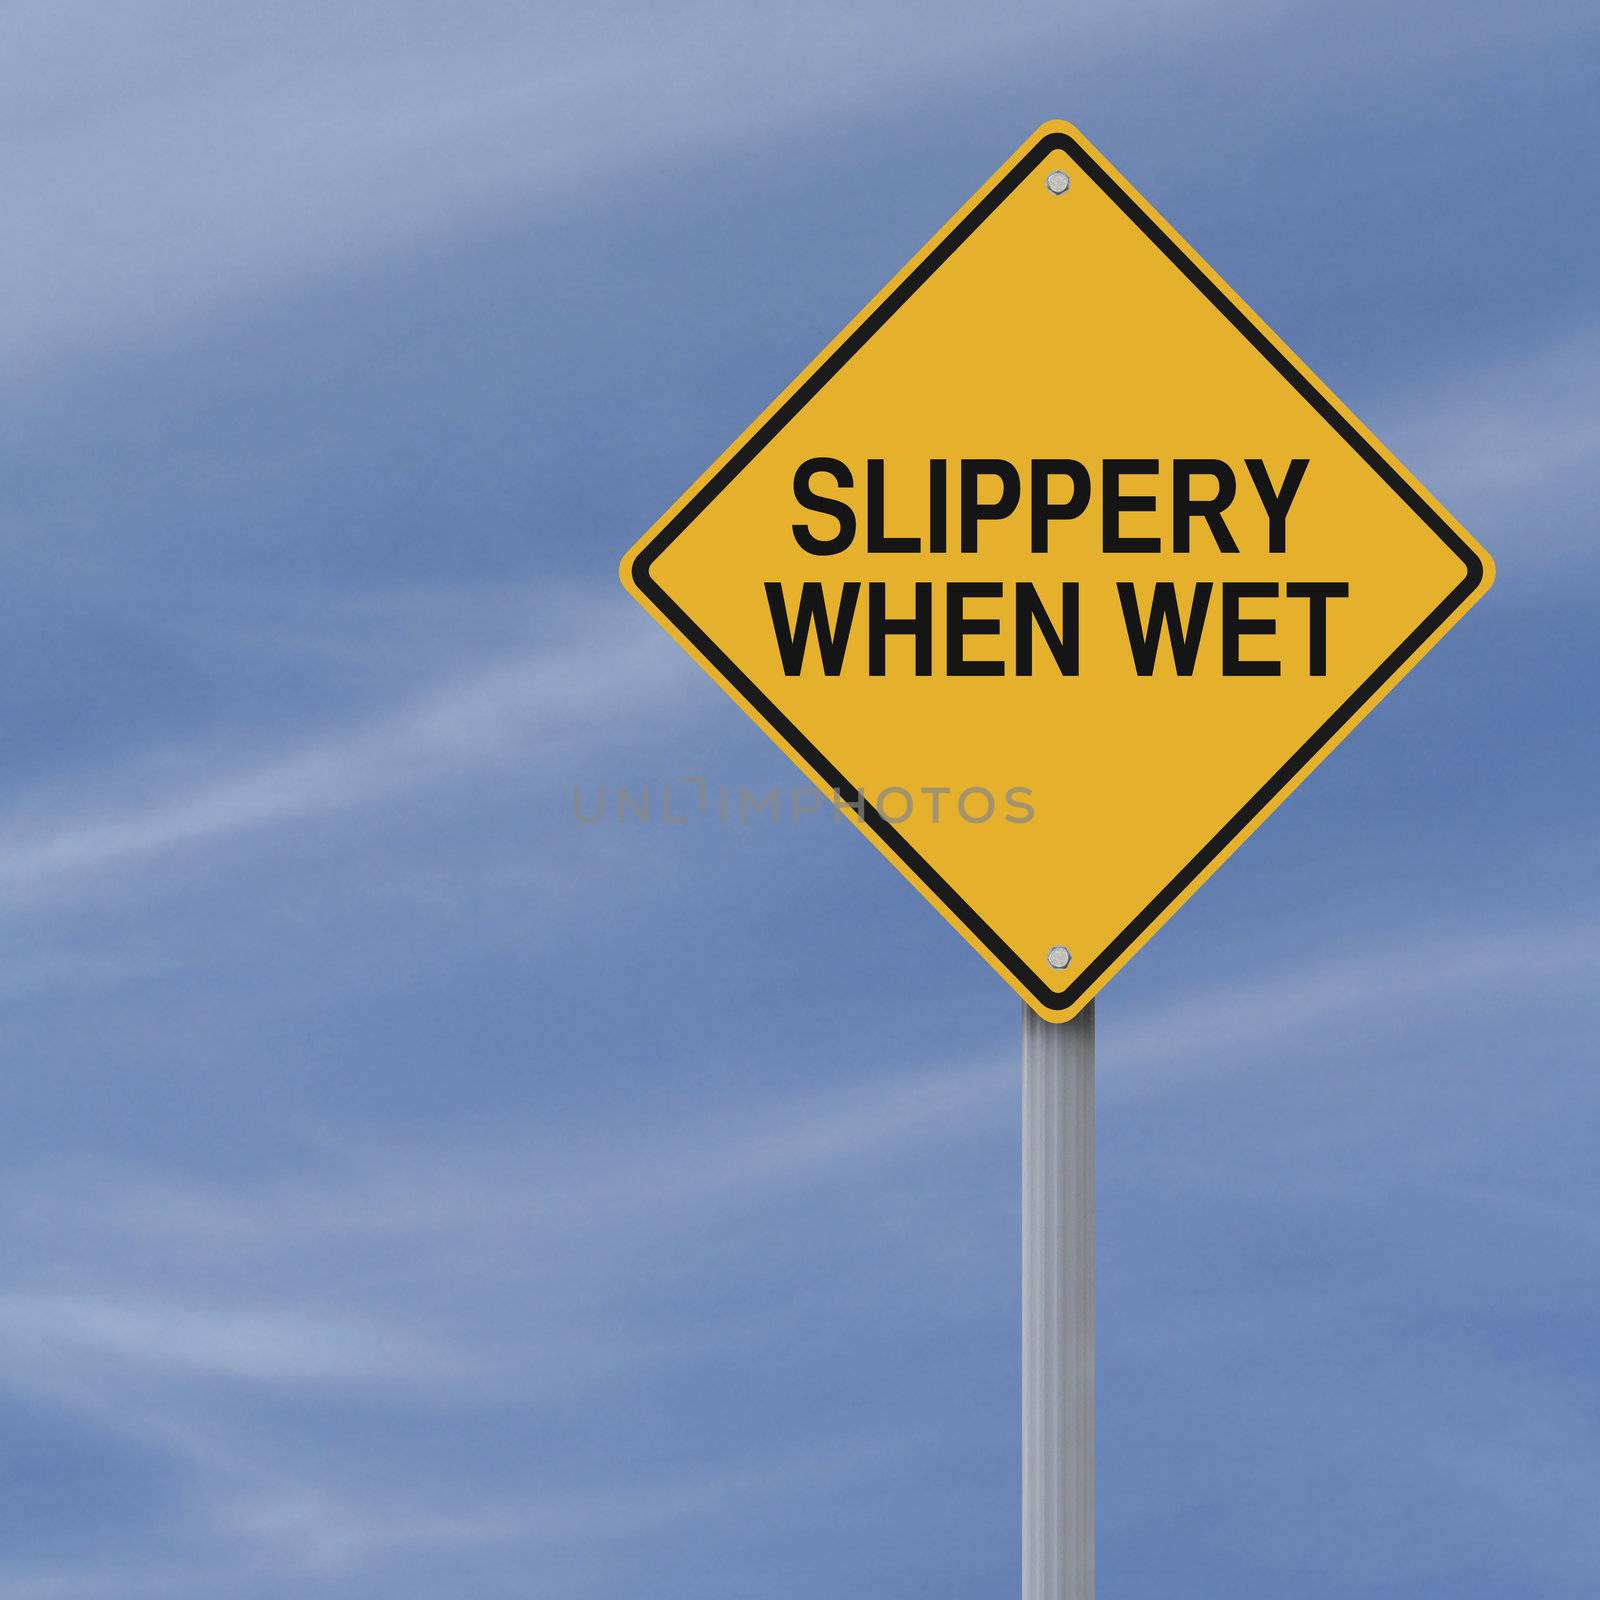 Slippery When Wet road sign against a blue sky background